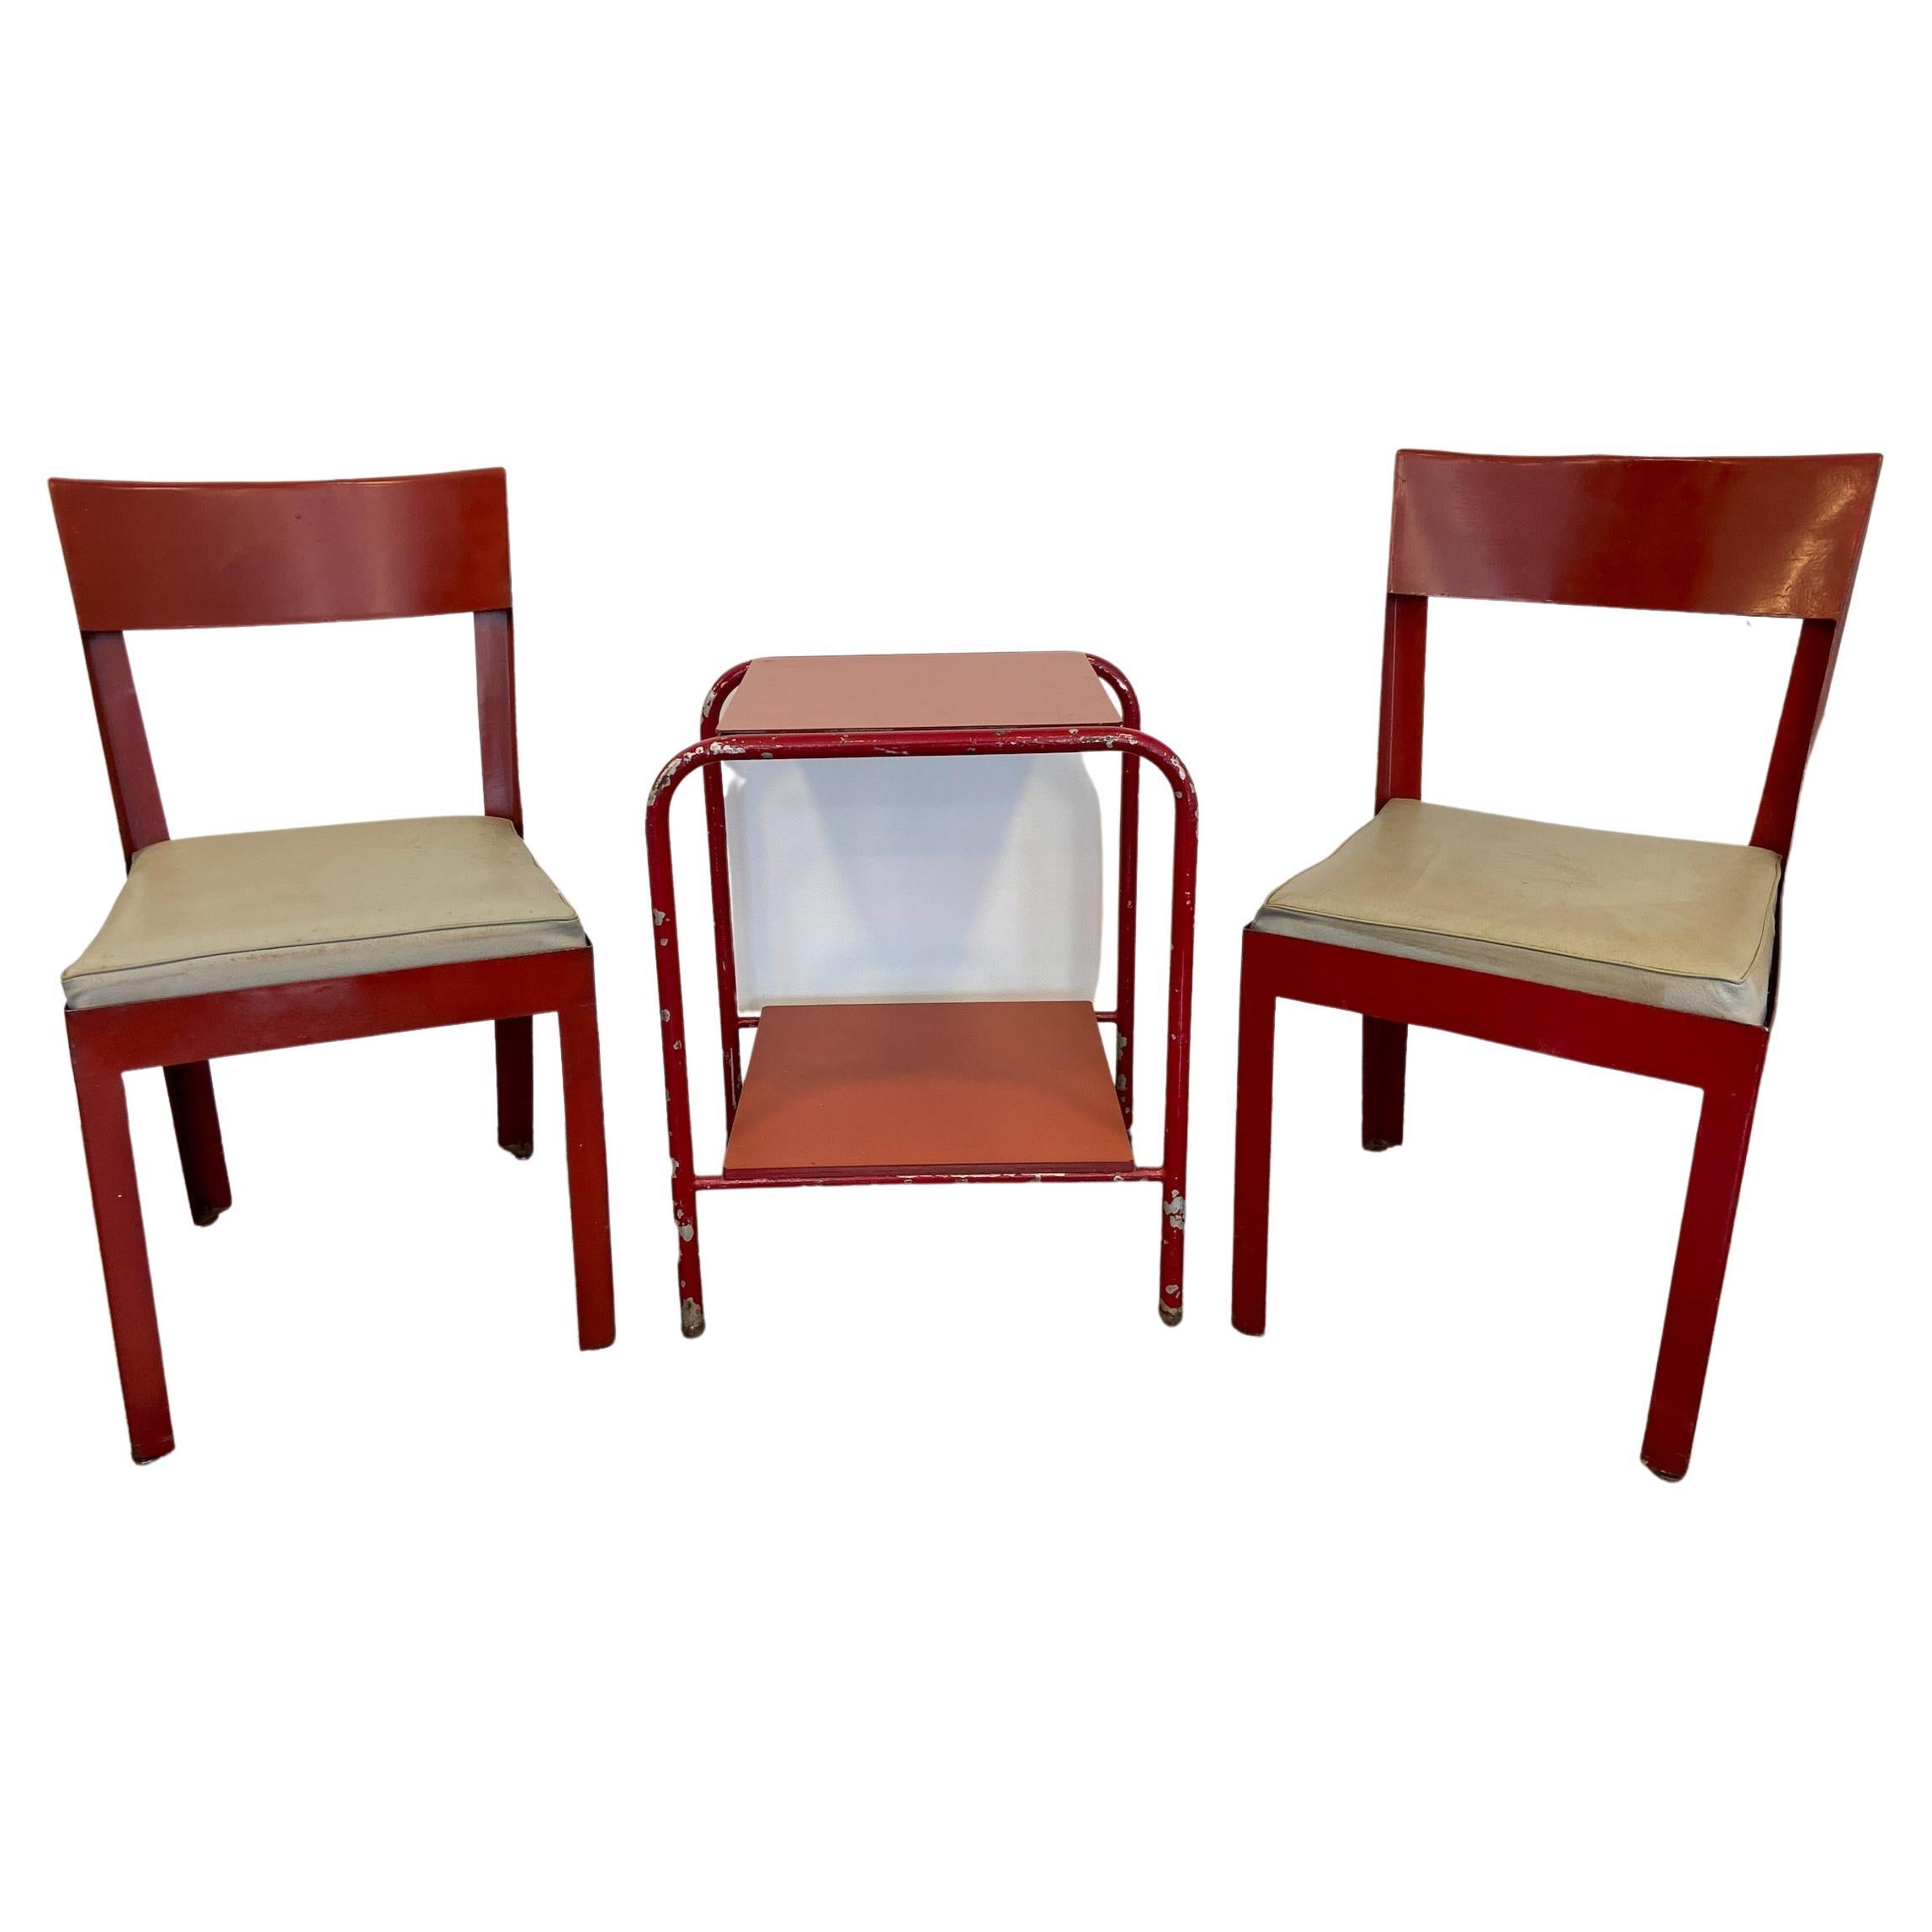 Set of 2 Chairs and 1 Pedestal Table, Jean Prouvé, circa 1935